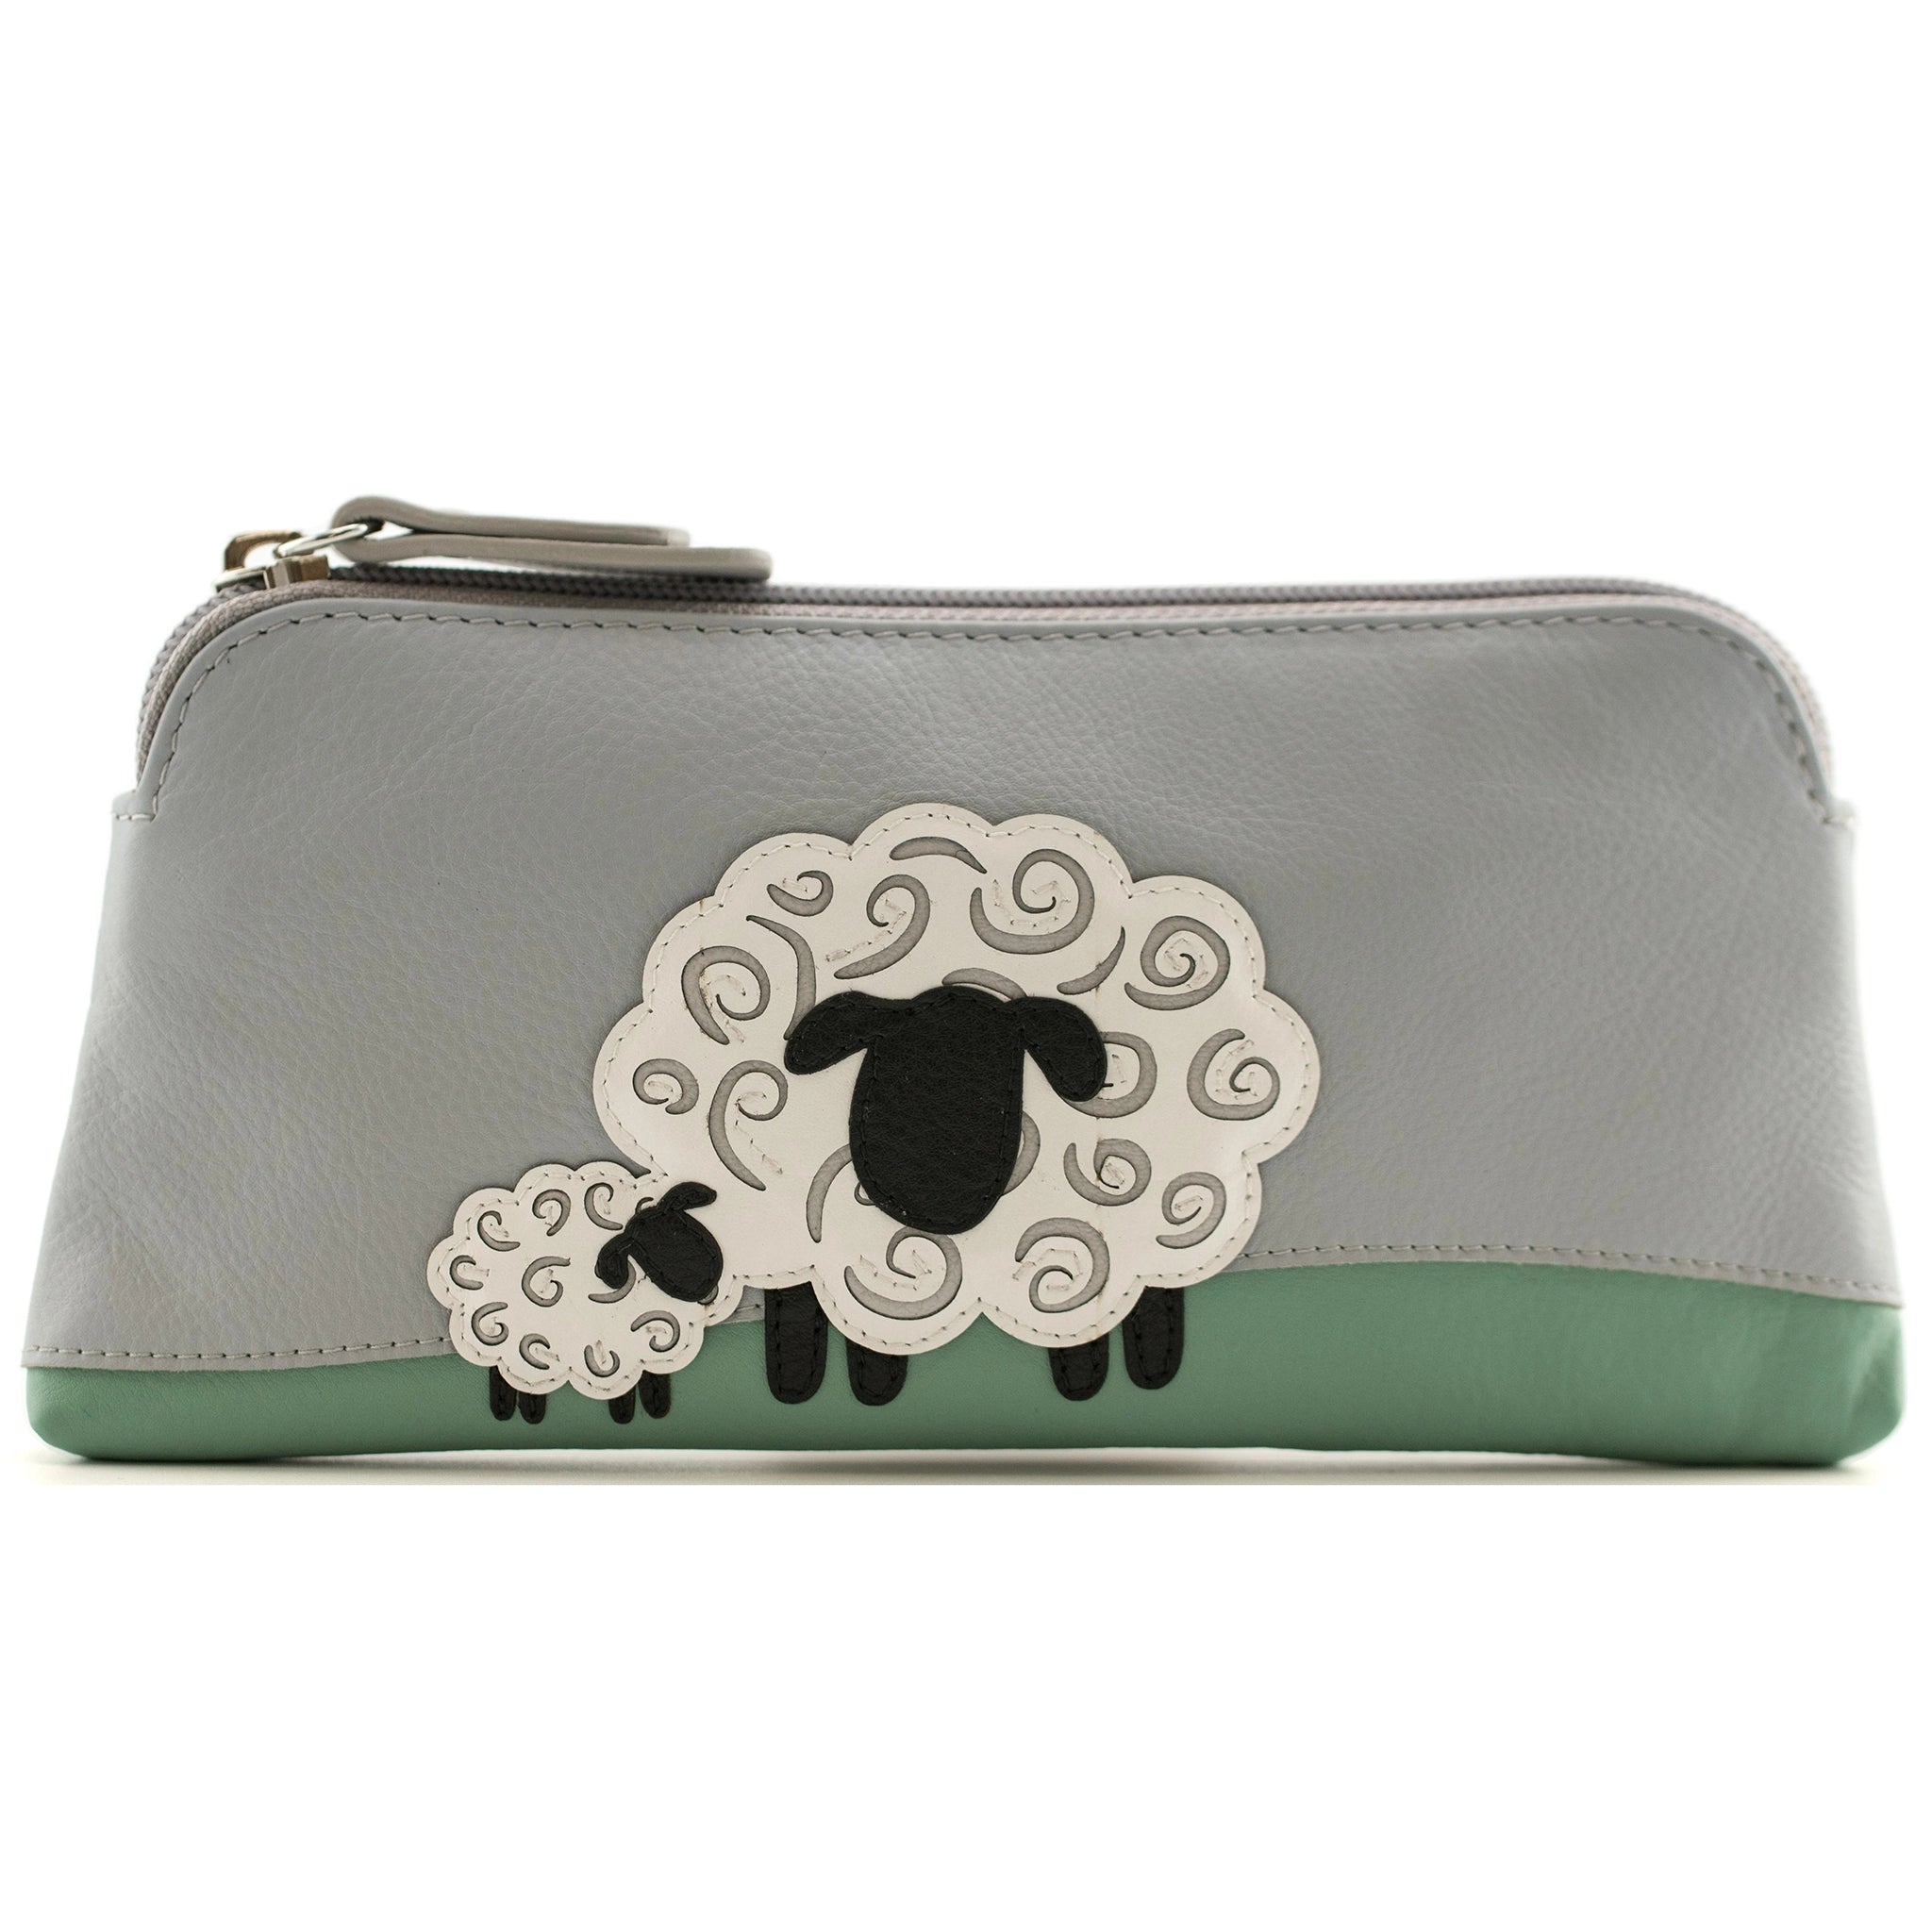 A leather zip top glasses case featuring a design with two sheep 